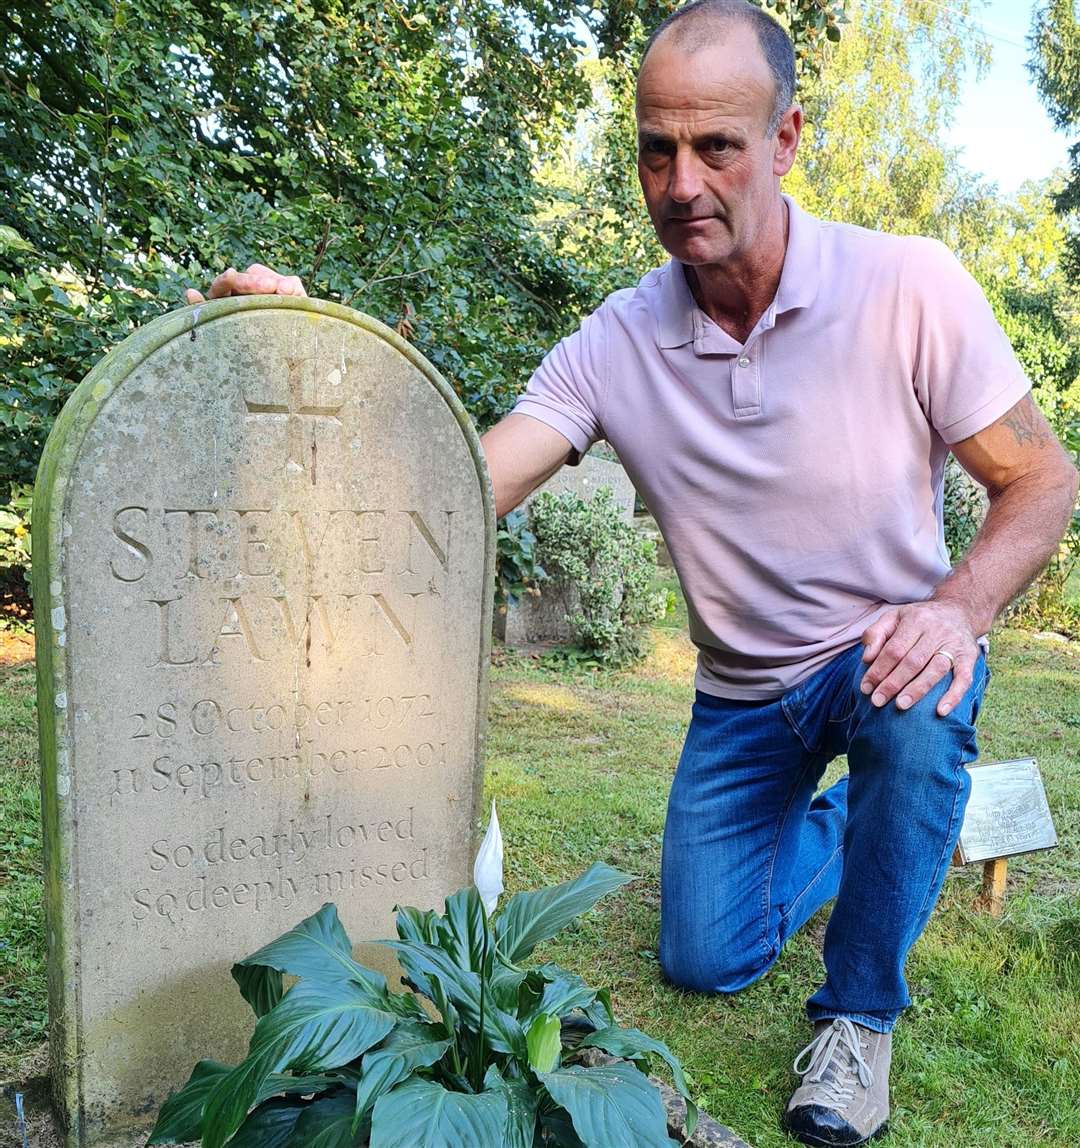 Nick Lawn at his brother's graveside